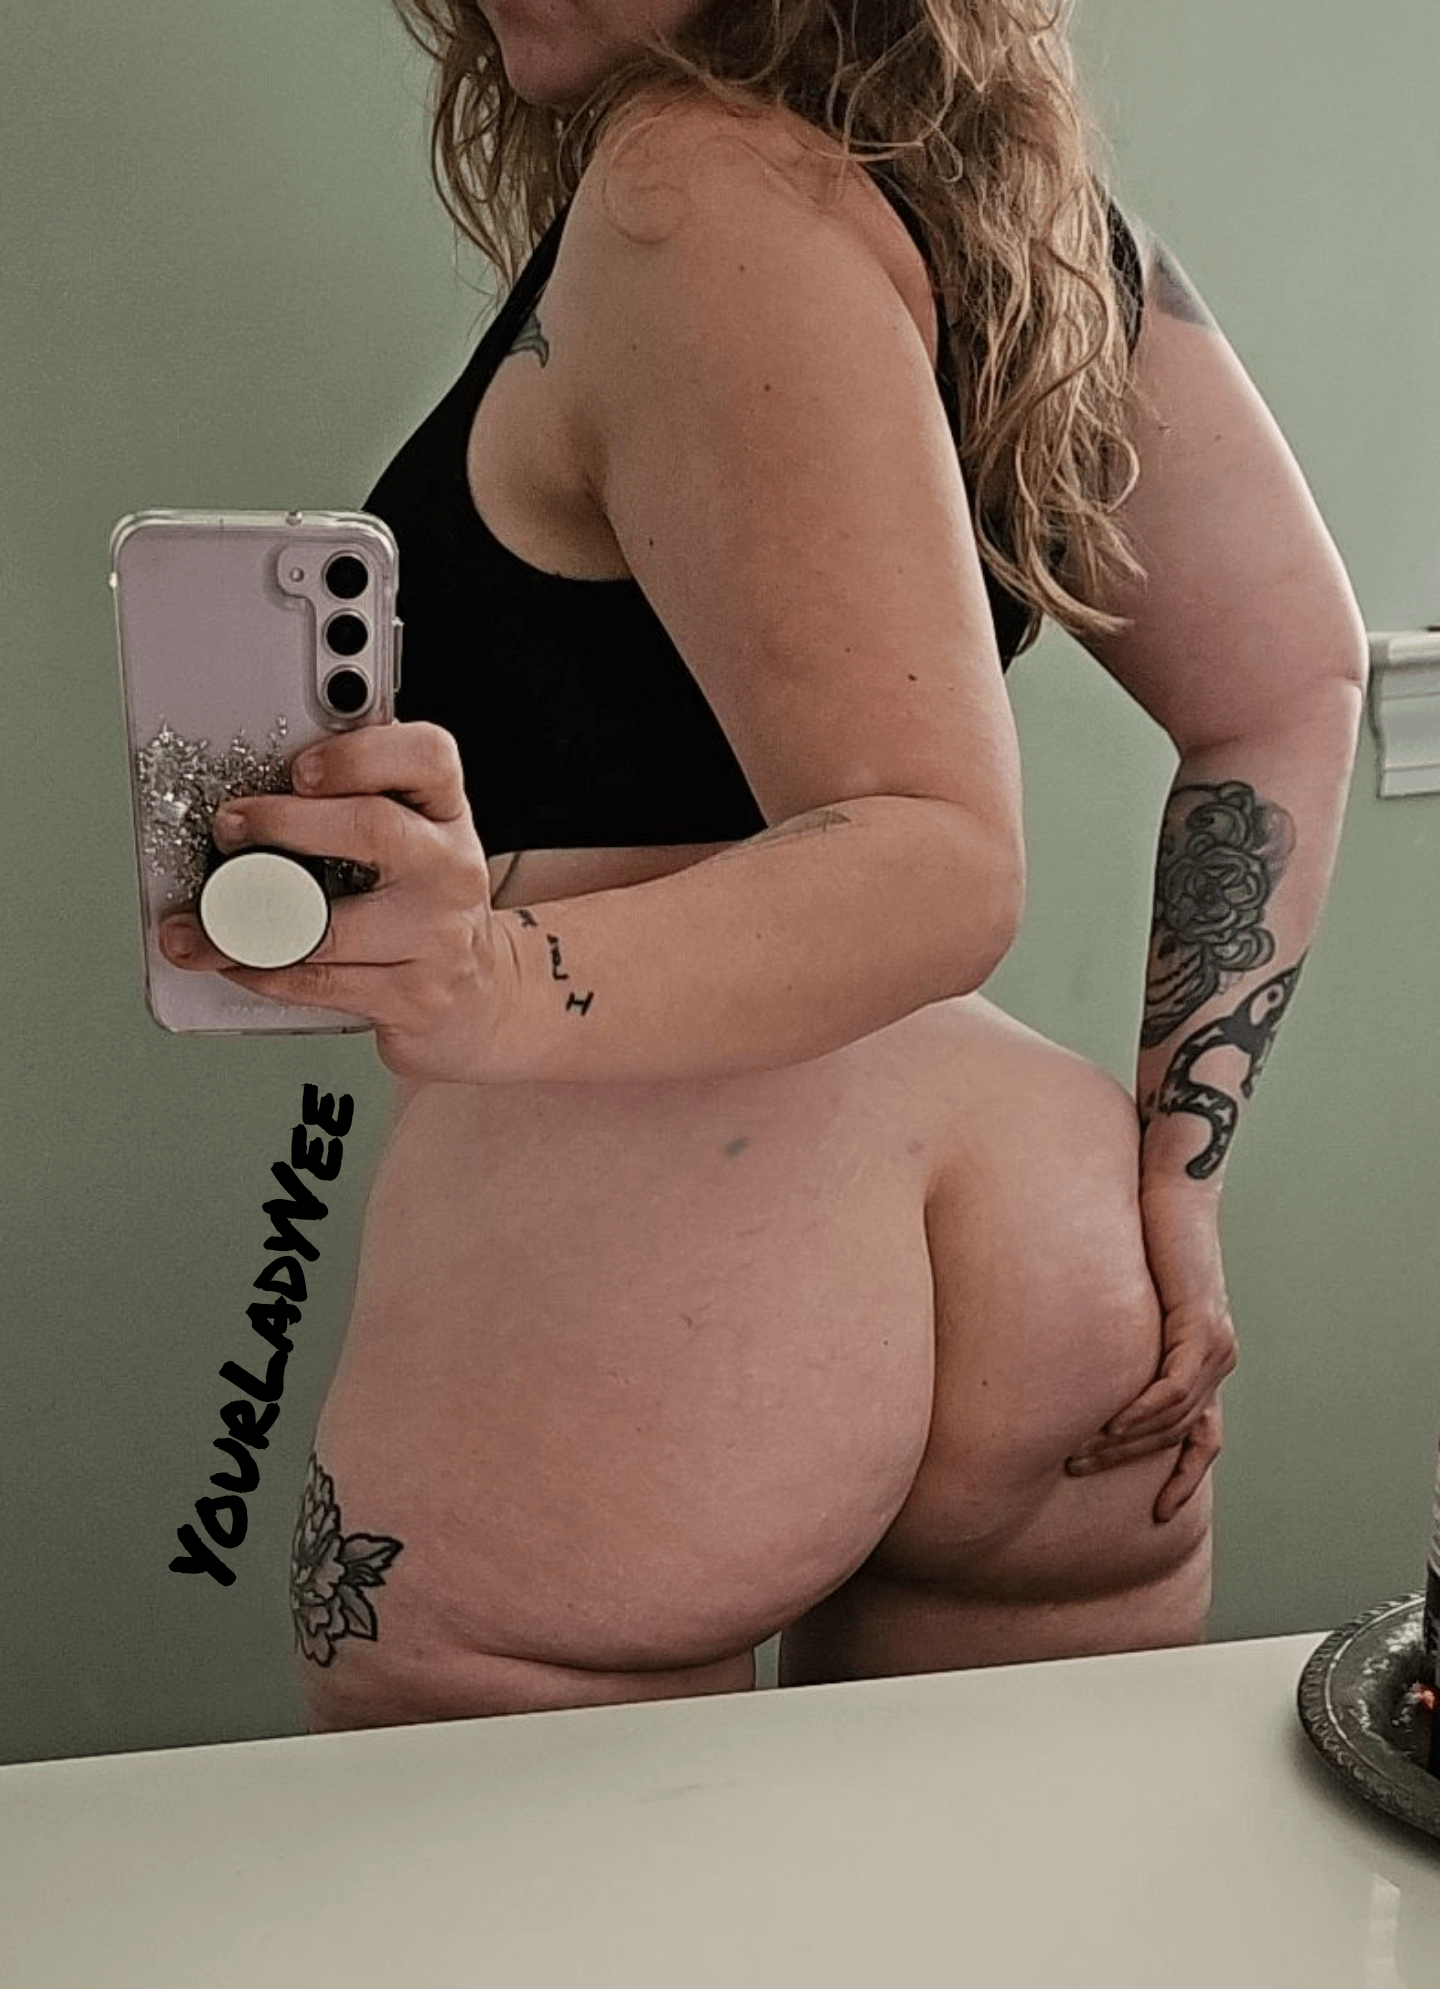 PAWG No booty play yesterday has me really feening for